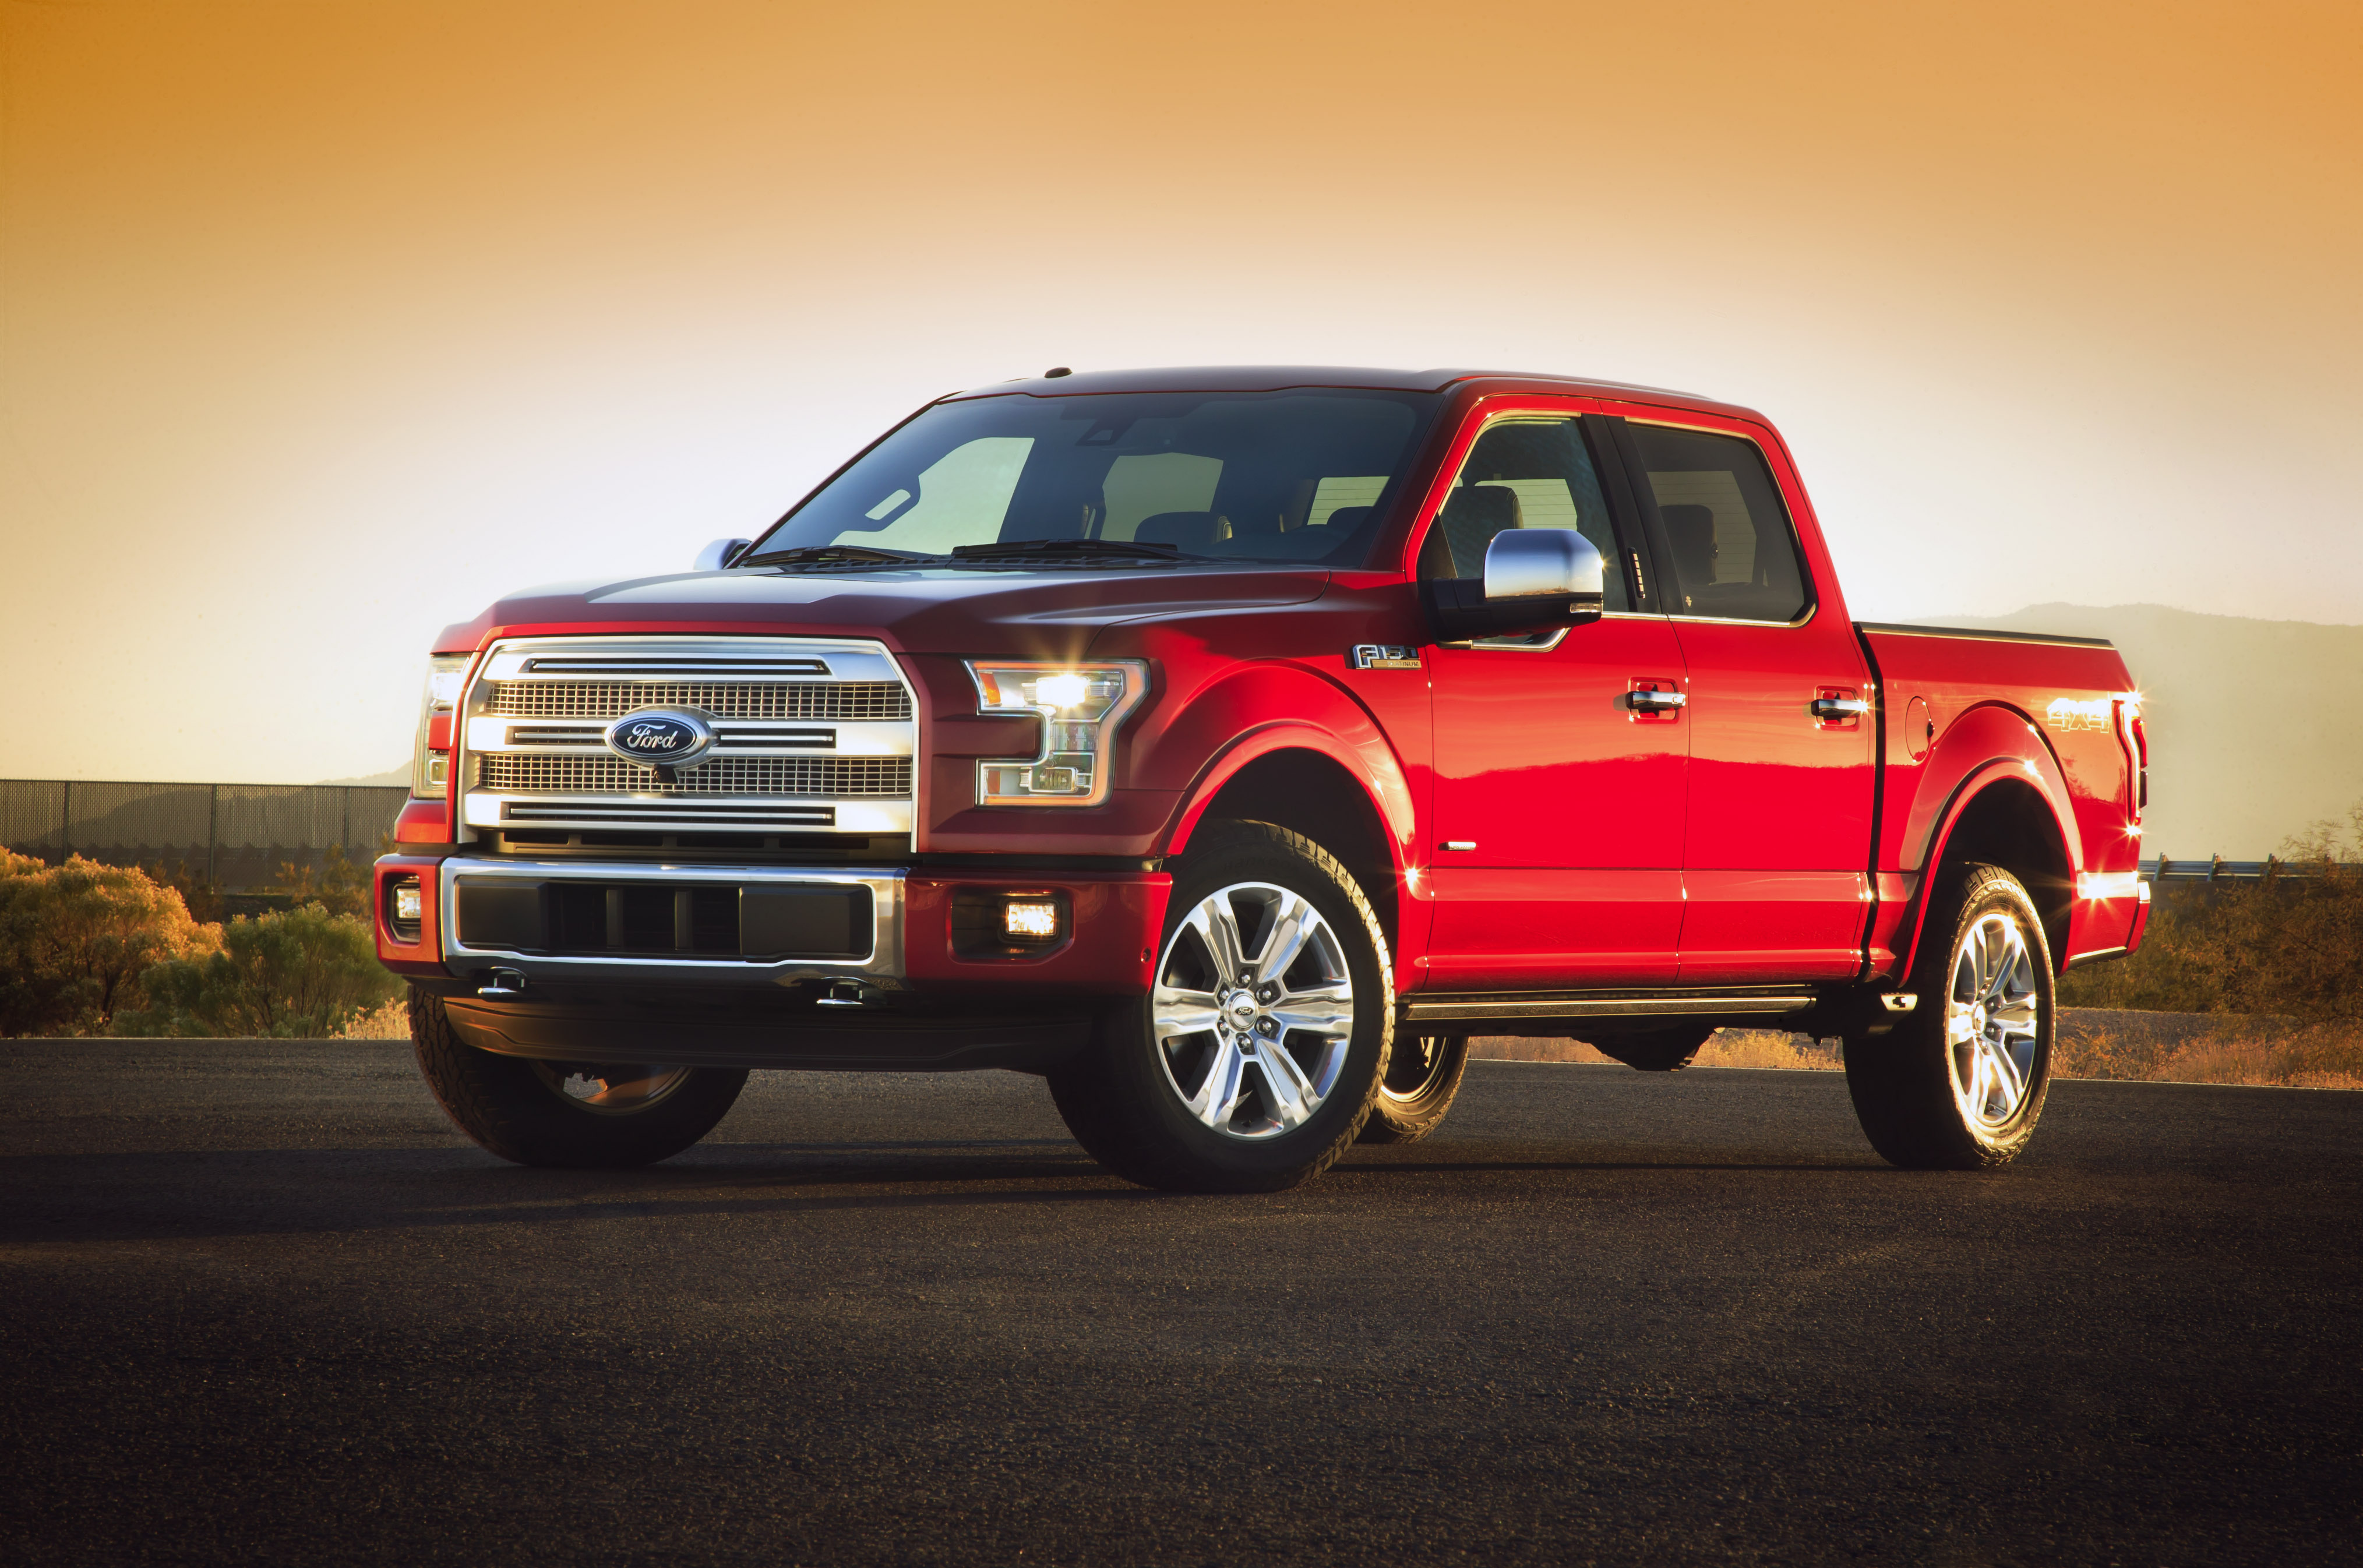 Ford F-150 Backgrounds, Compatible - PC, Mobile, Gadgets| 4056x2692 px